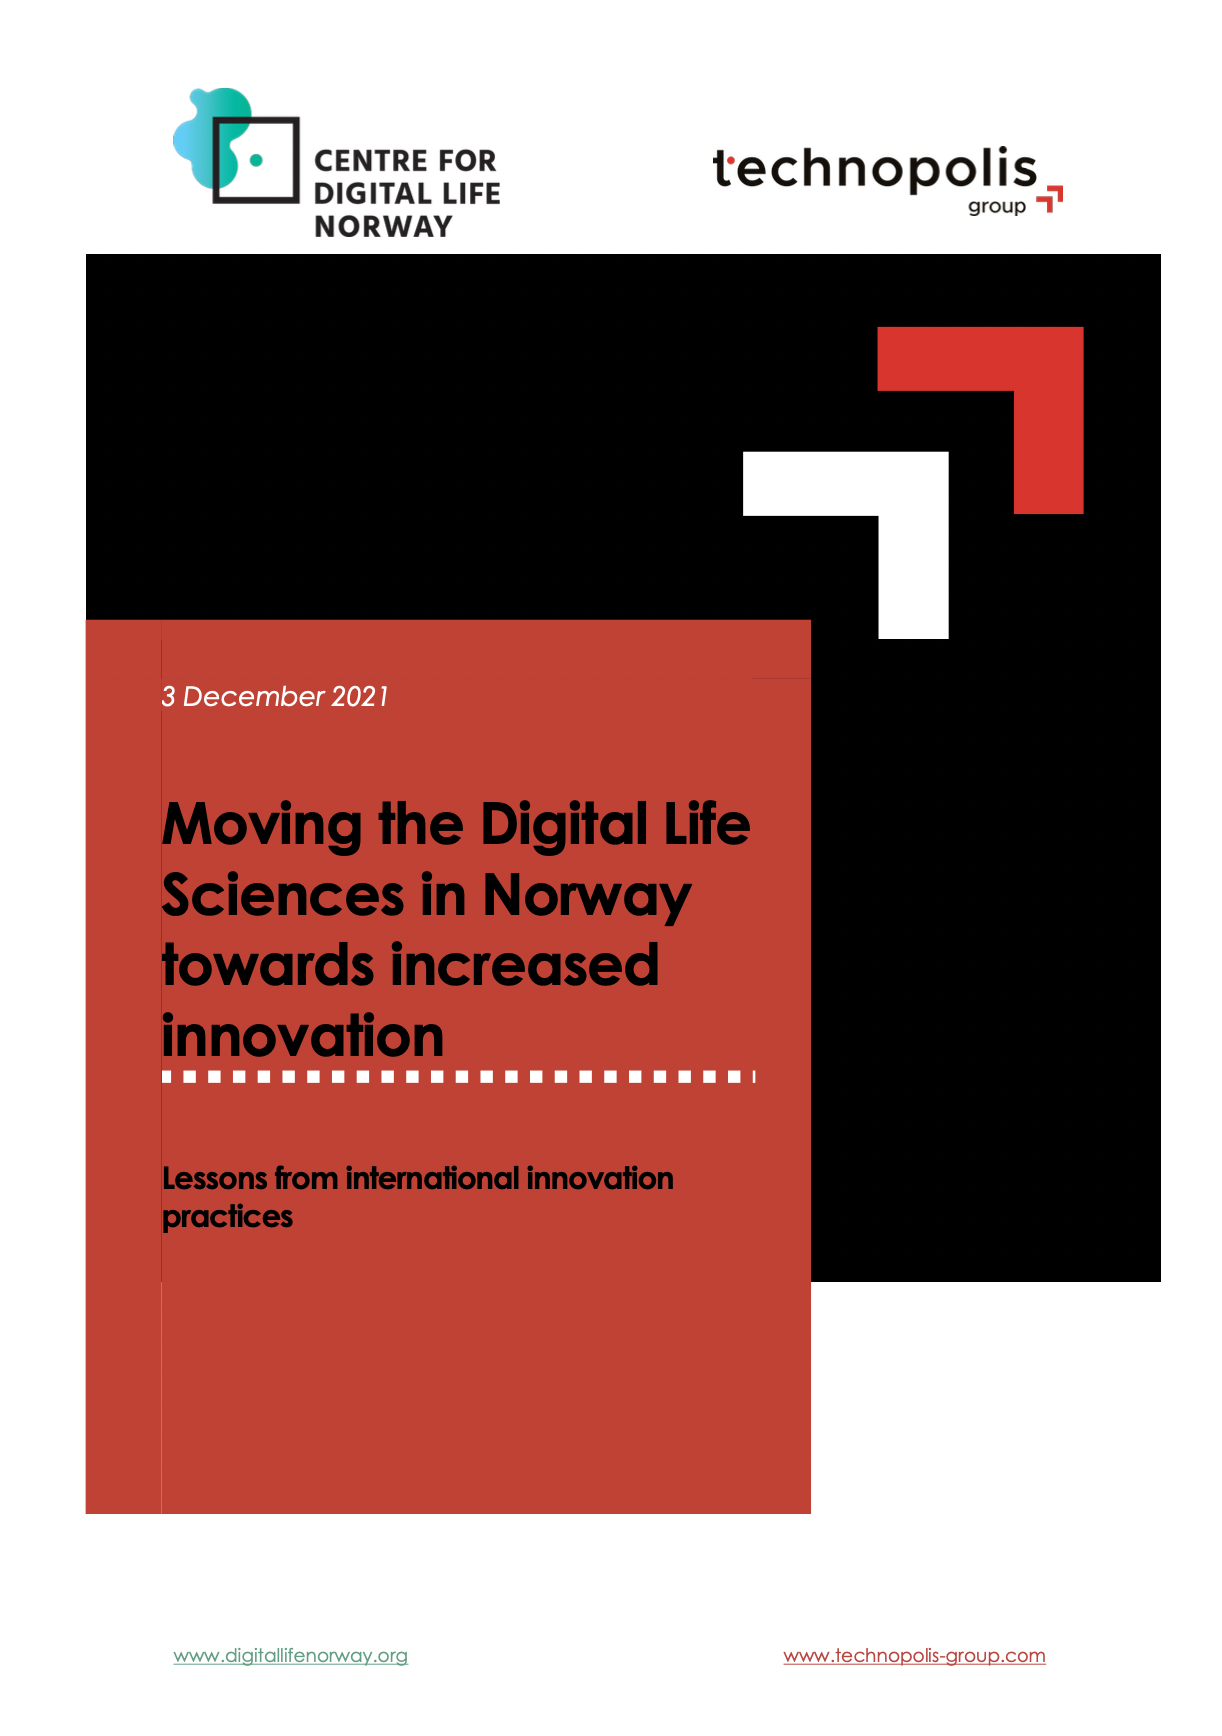 Moving the Digital Life Sciences in Norway towards increased innovation